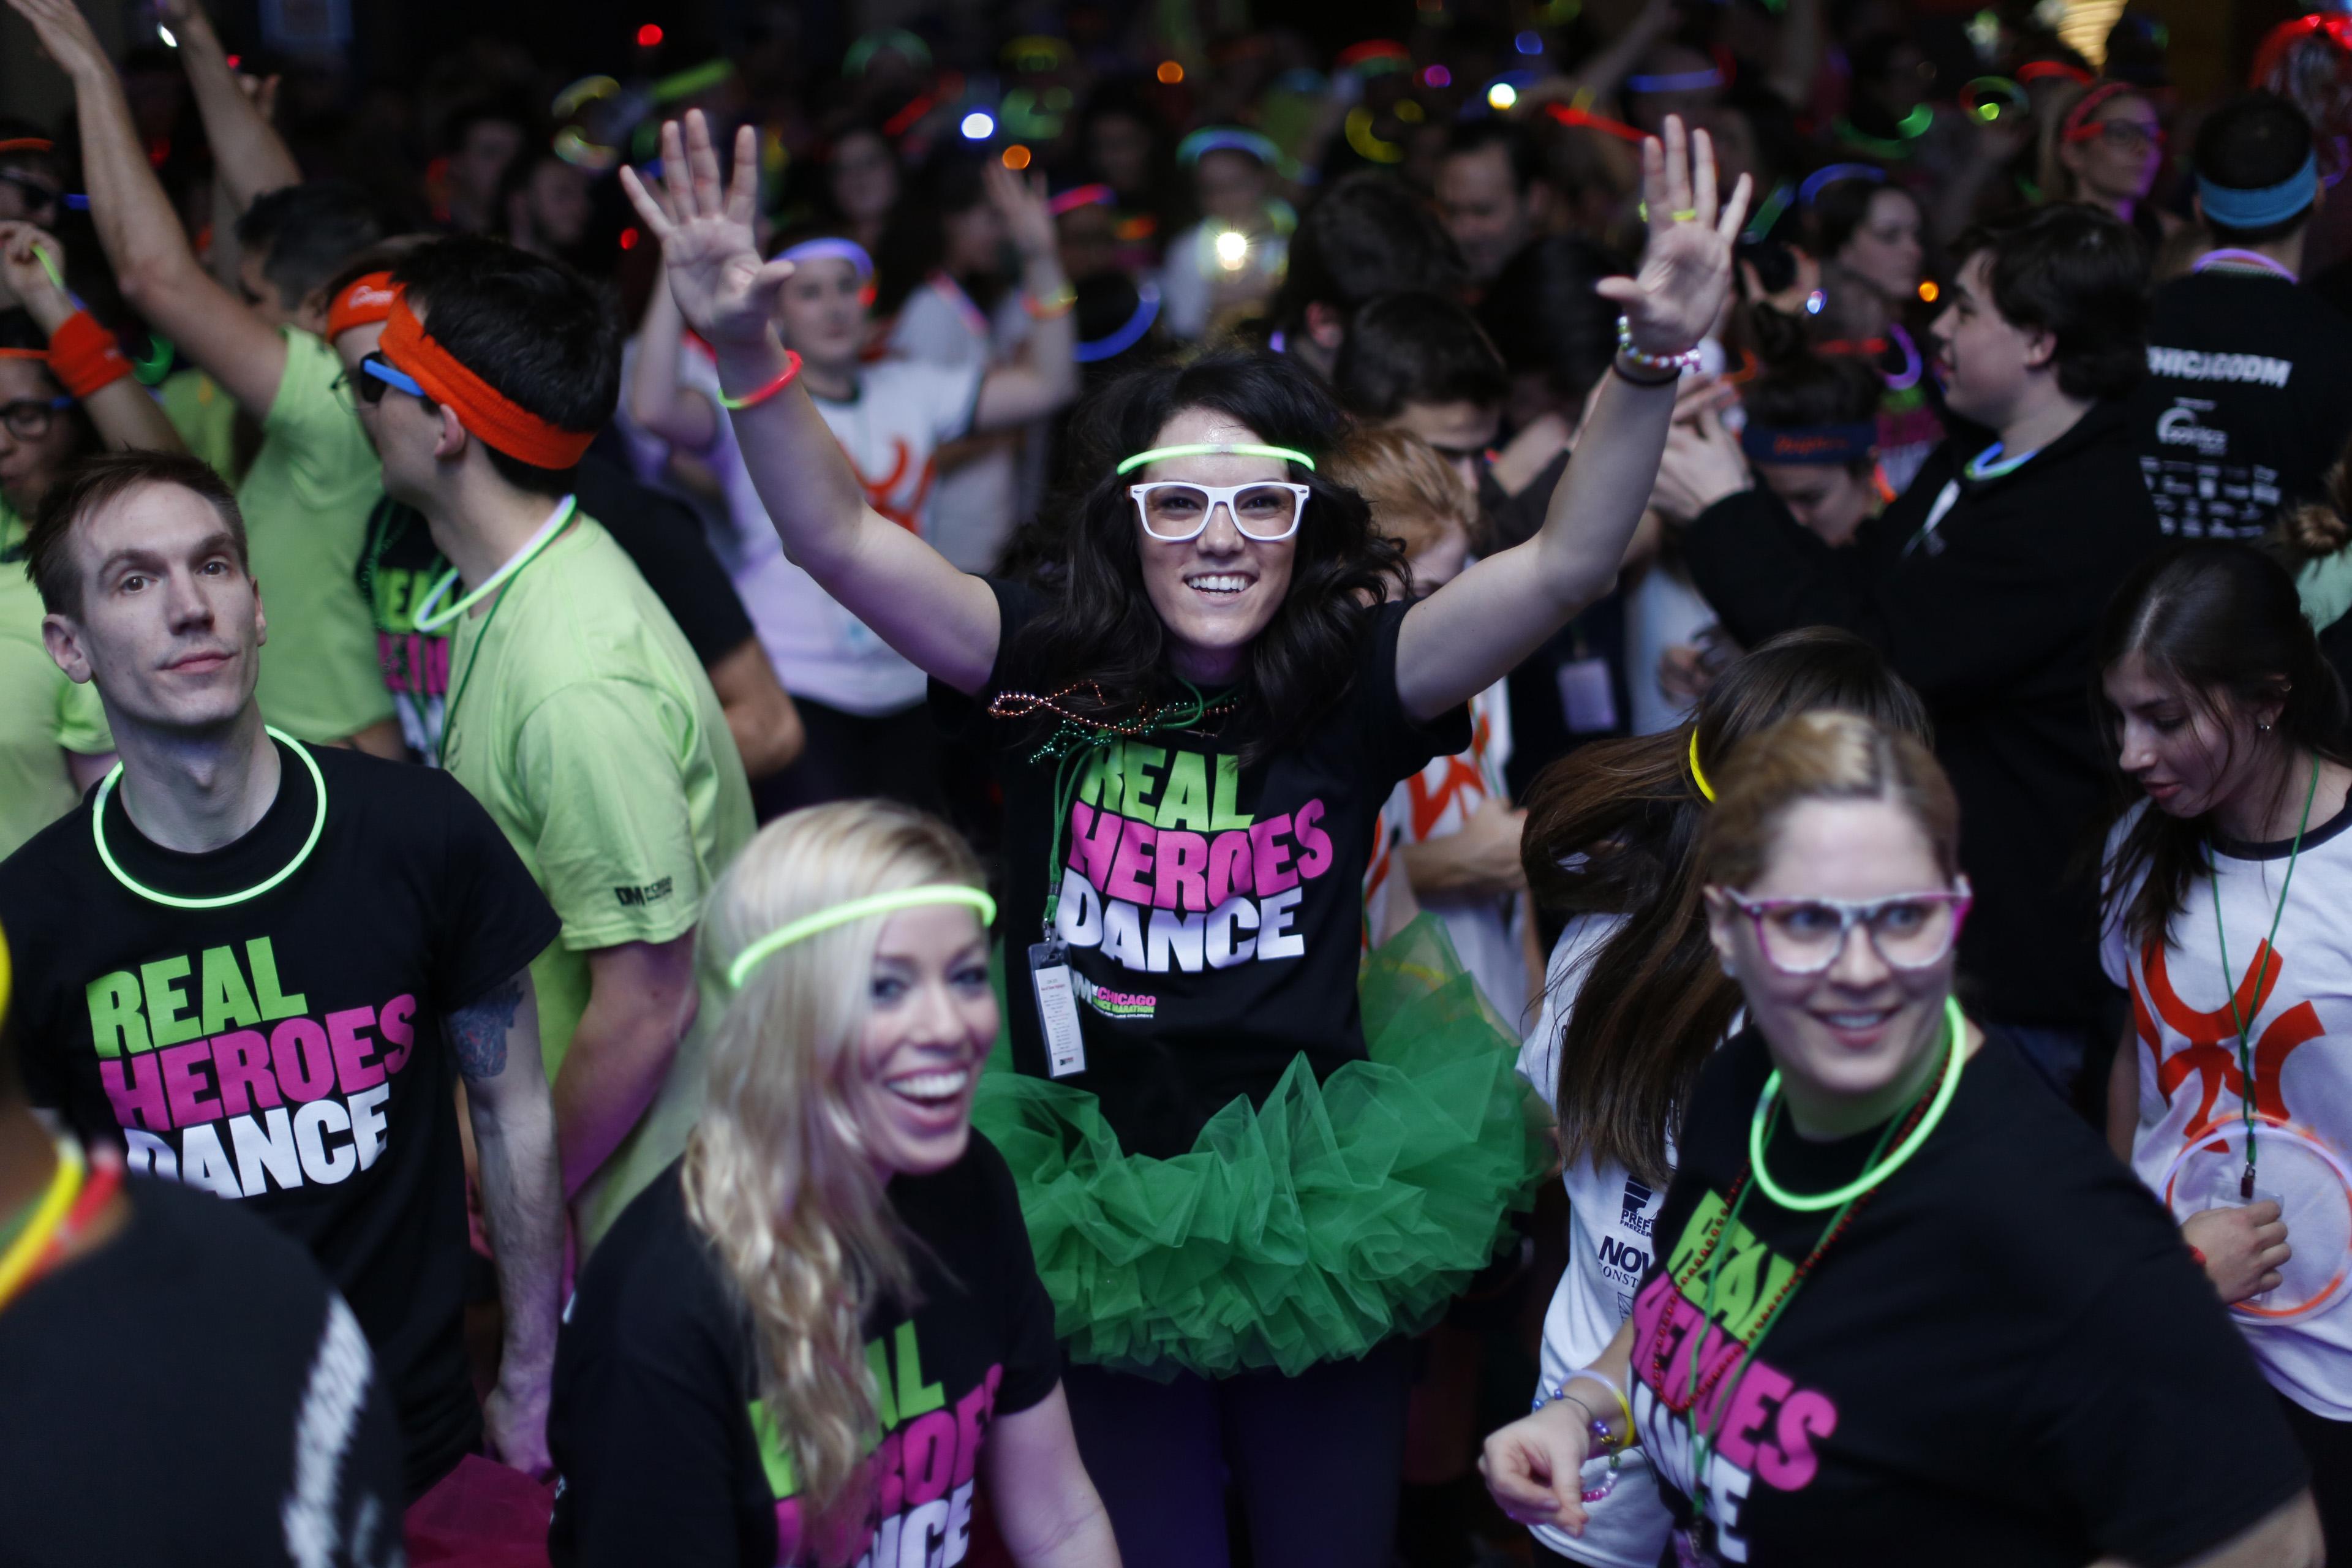 The Chicago Dance Marathon has raised more than $2 million for patients of the Ann & Robert H. Lurie Children's Hospital of Chicago. (Courtesy of Lurie Children's Foundation)